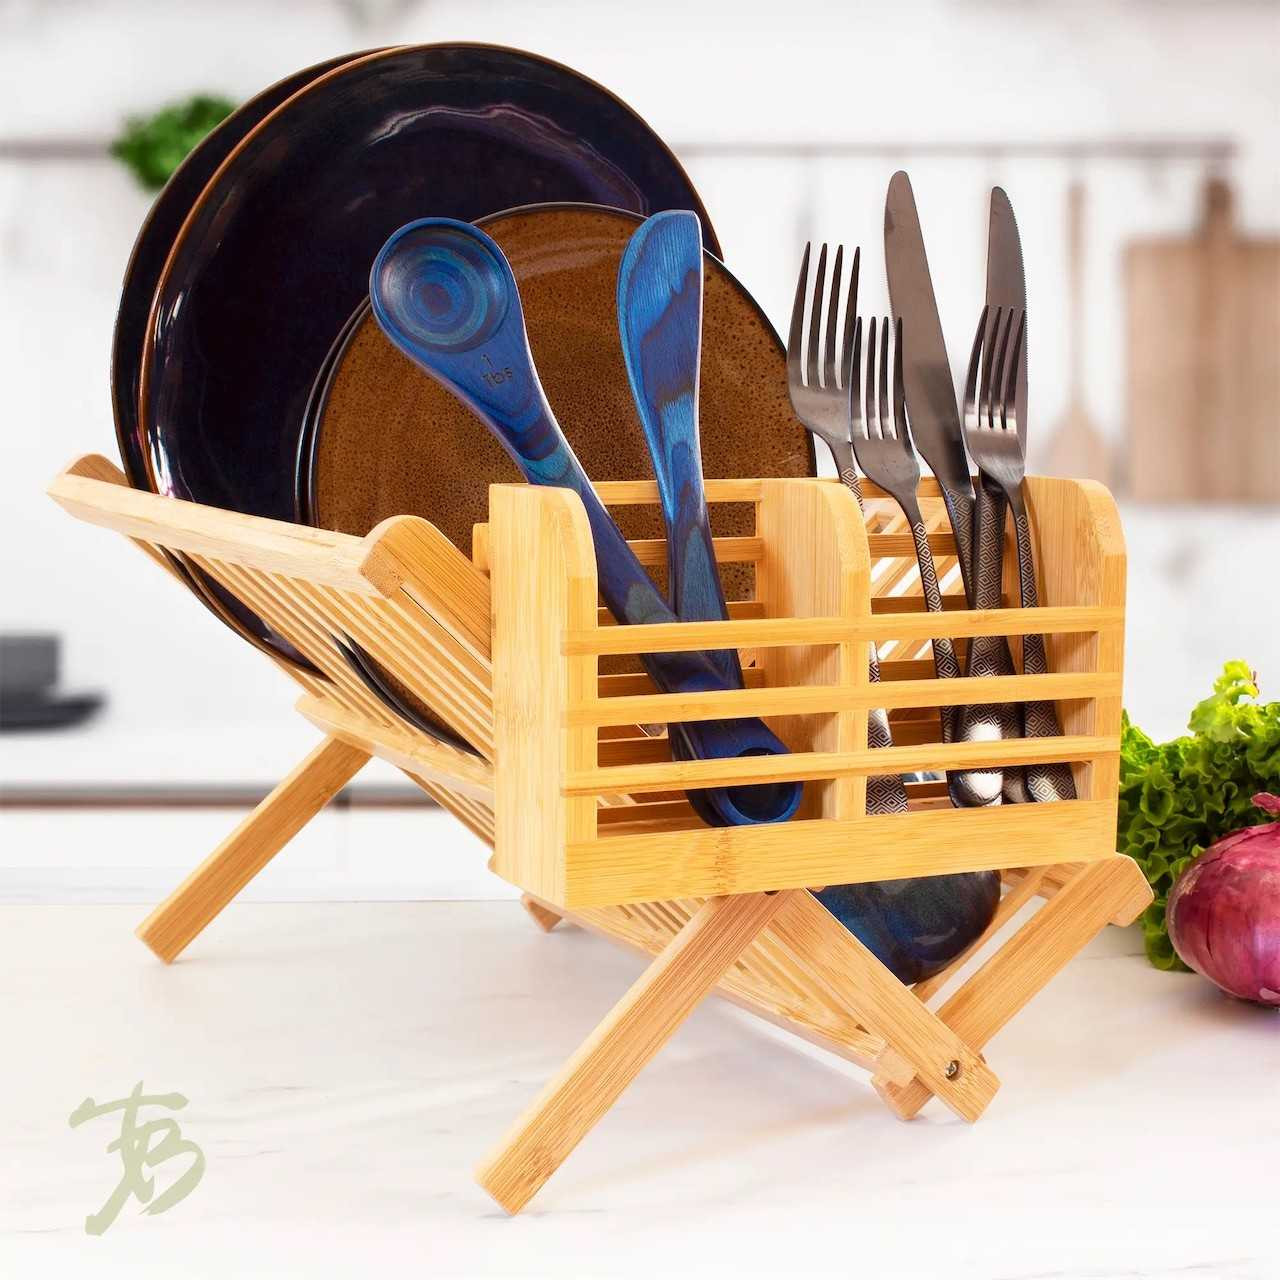 https://cdn11.bigcommerce.com/s-36vh87glm0/images/stencil/1280x1280/products/16692/36894/Totally-Bamboo-Dish-Rack-Utensil-Holder_25615__97170.1696973540.jpg?c=1?imbypass=on